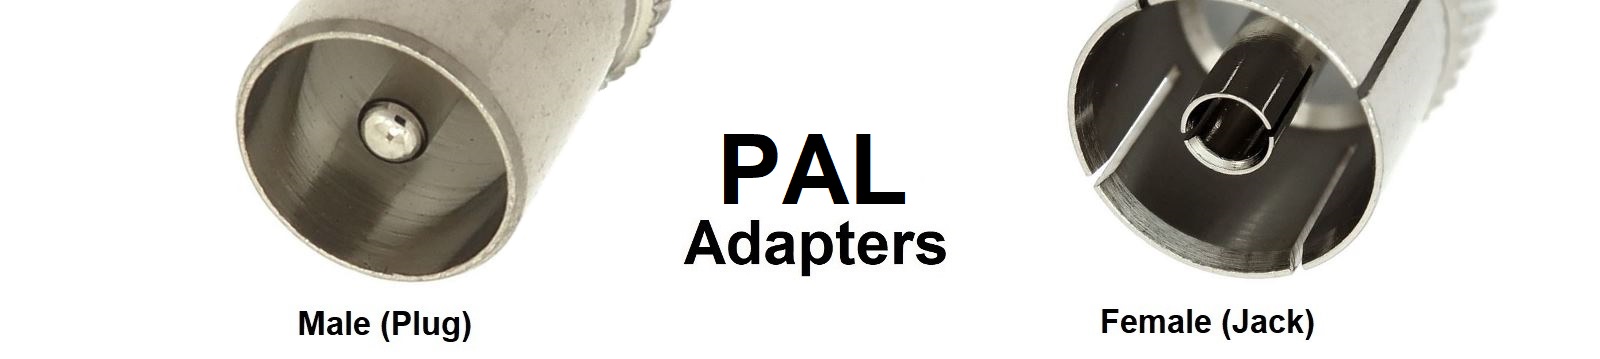 PAL Adapters Category Banner - Max-Gain Systems, Inc.